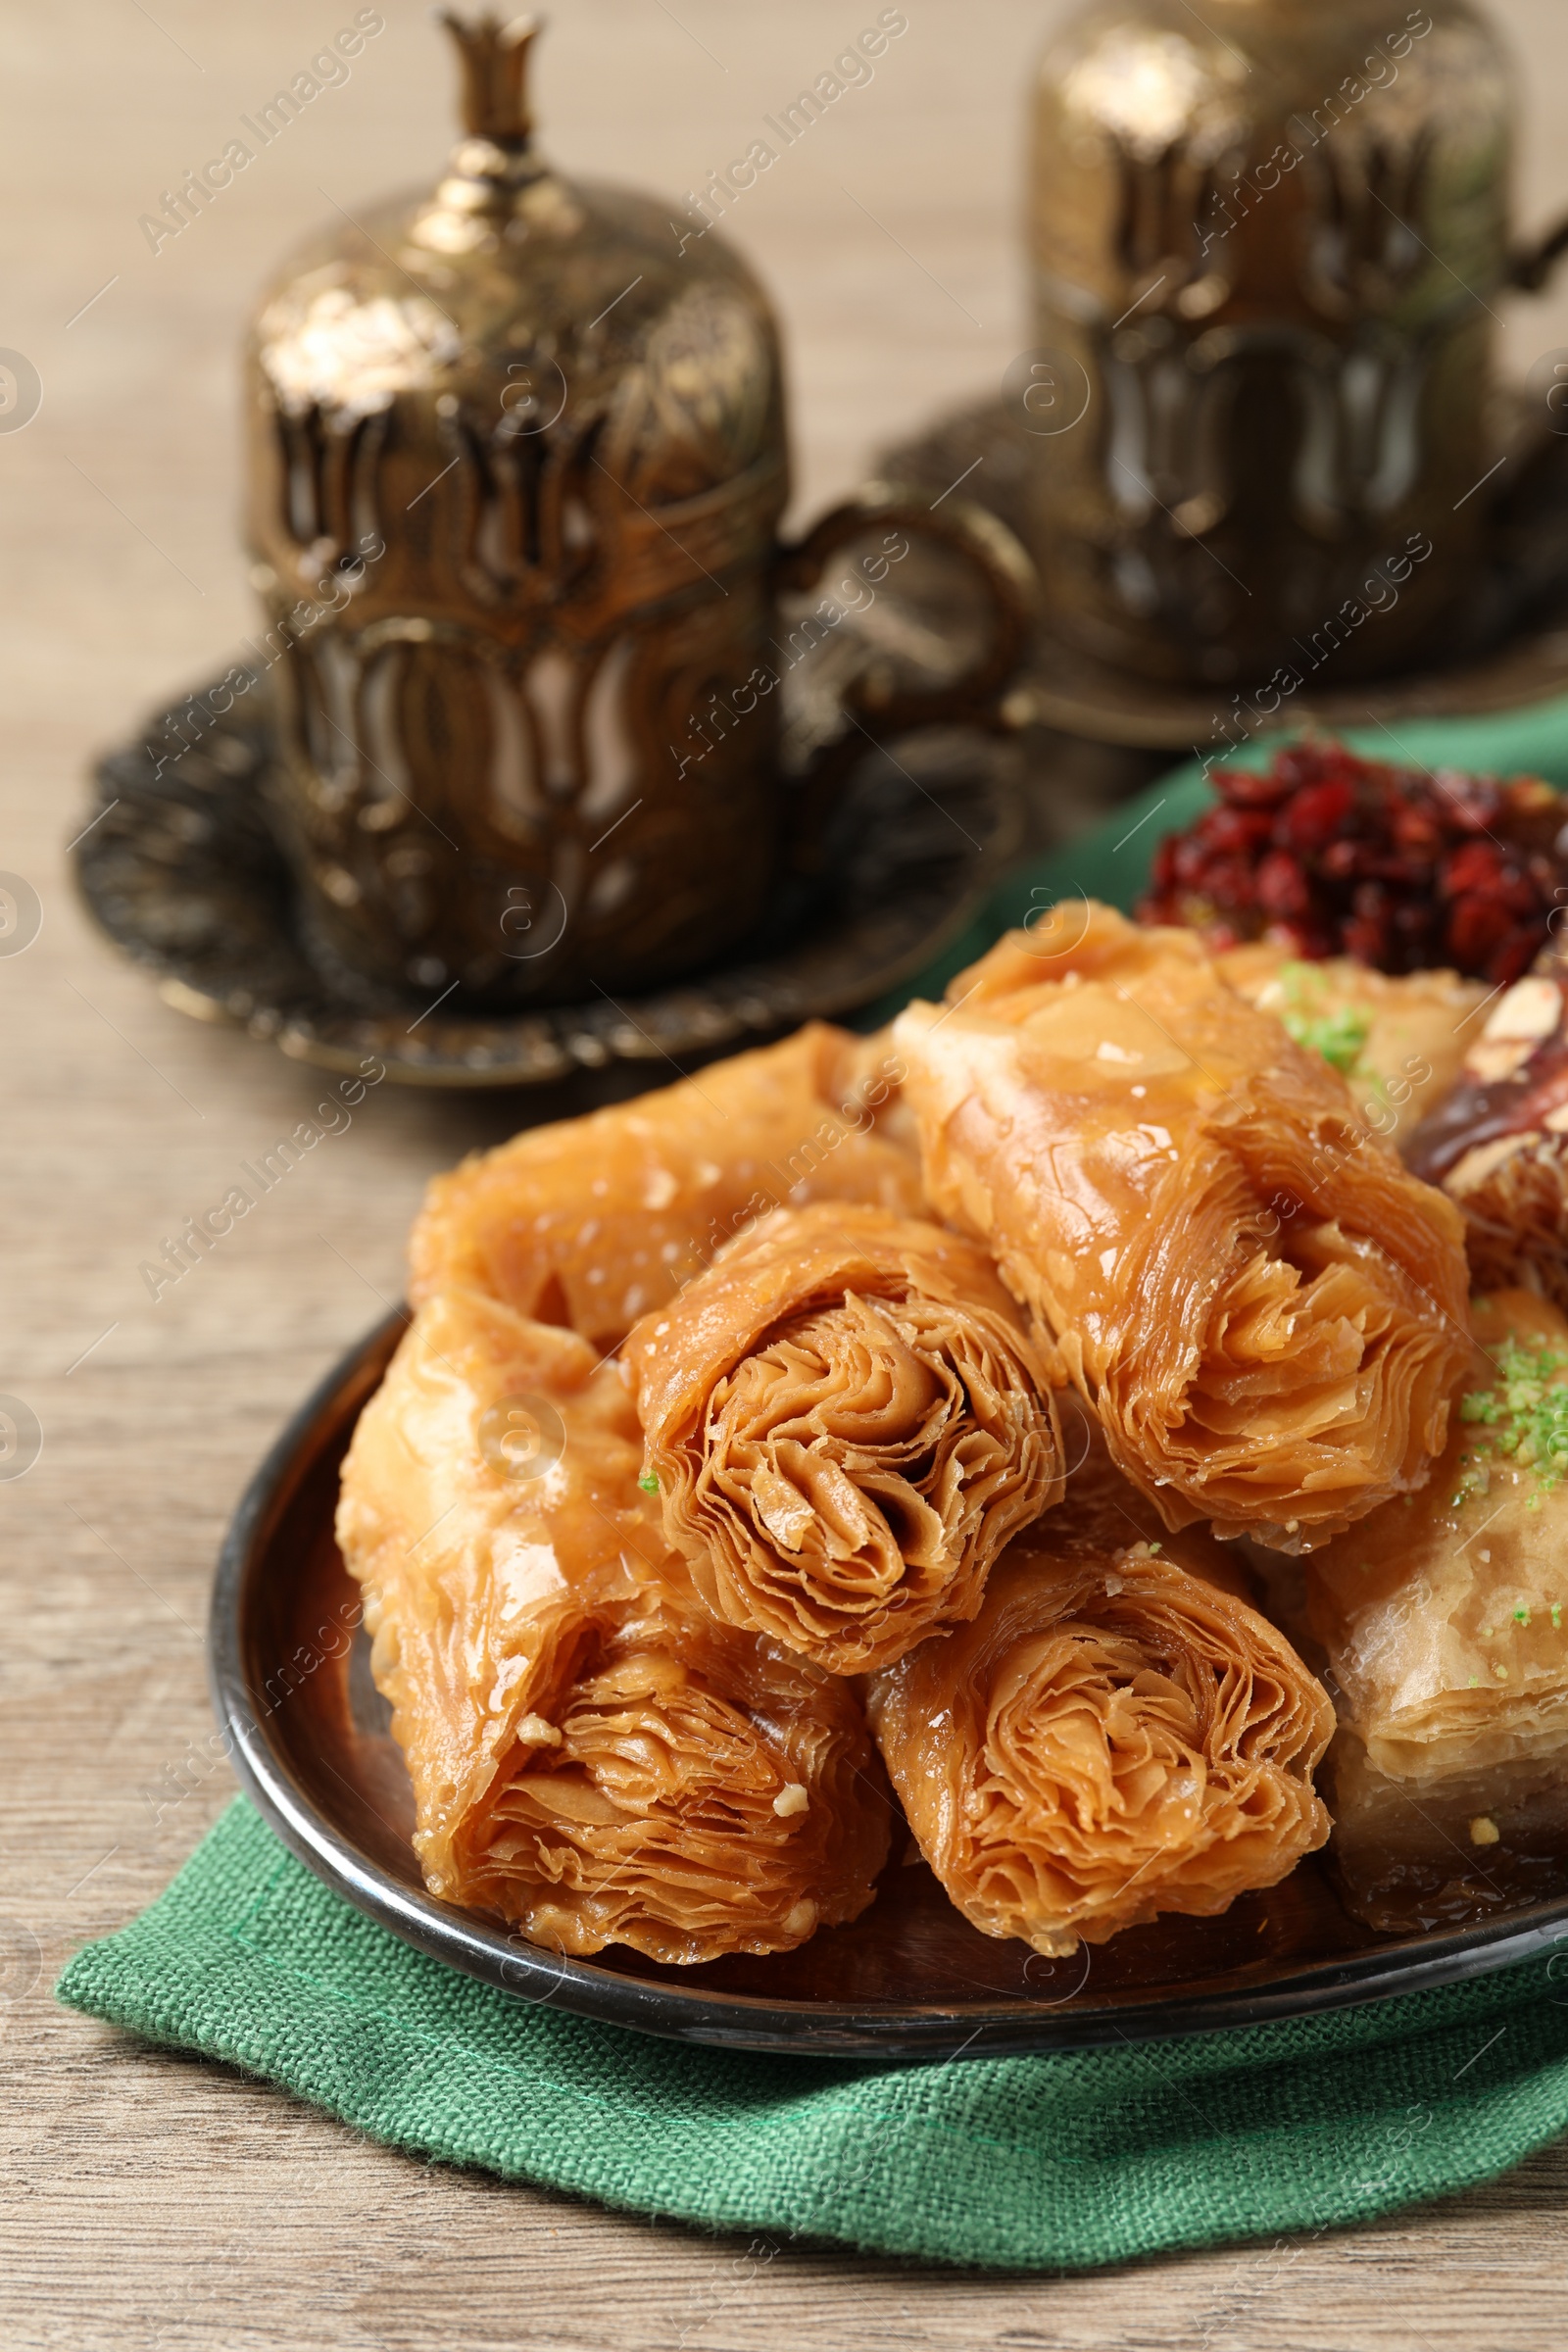 Photo of Tea and baklava dessert and Turkish delight served in vintage tea set on wooden table, closeup. Space for text